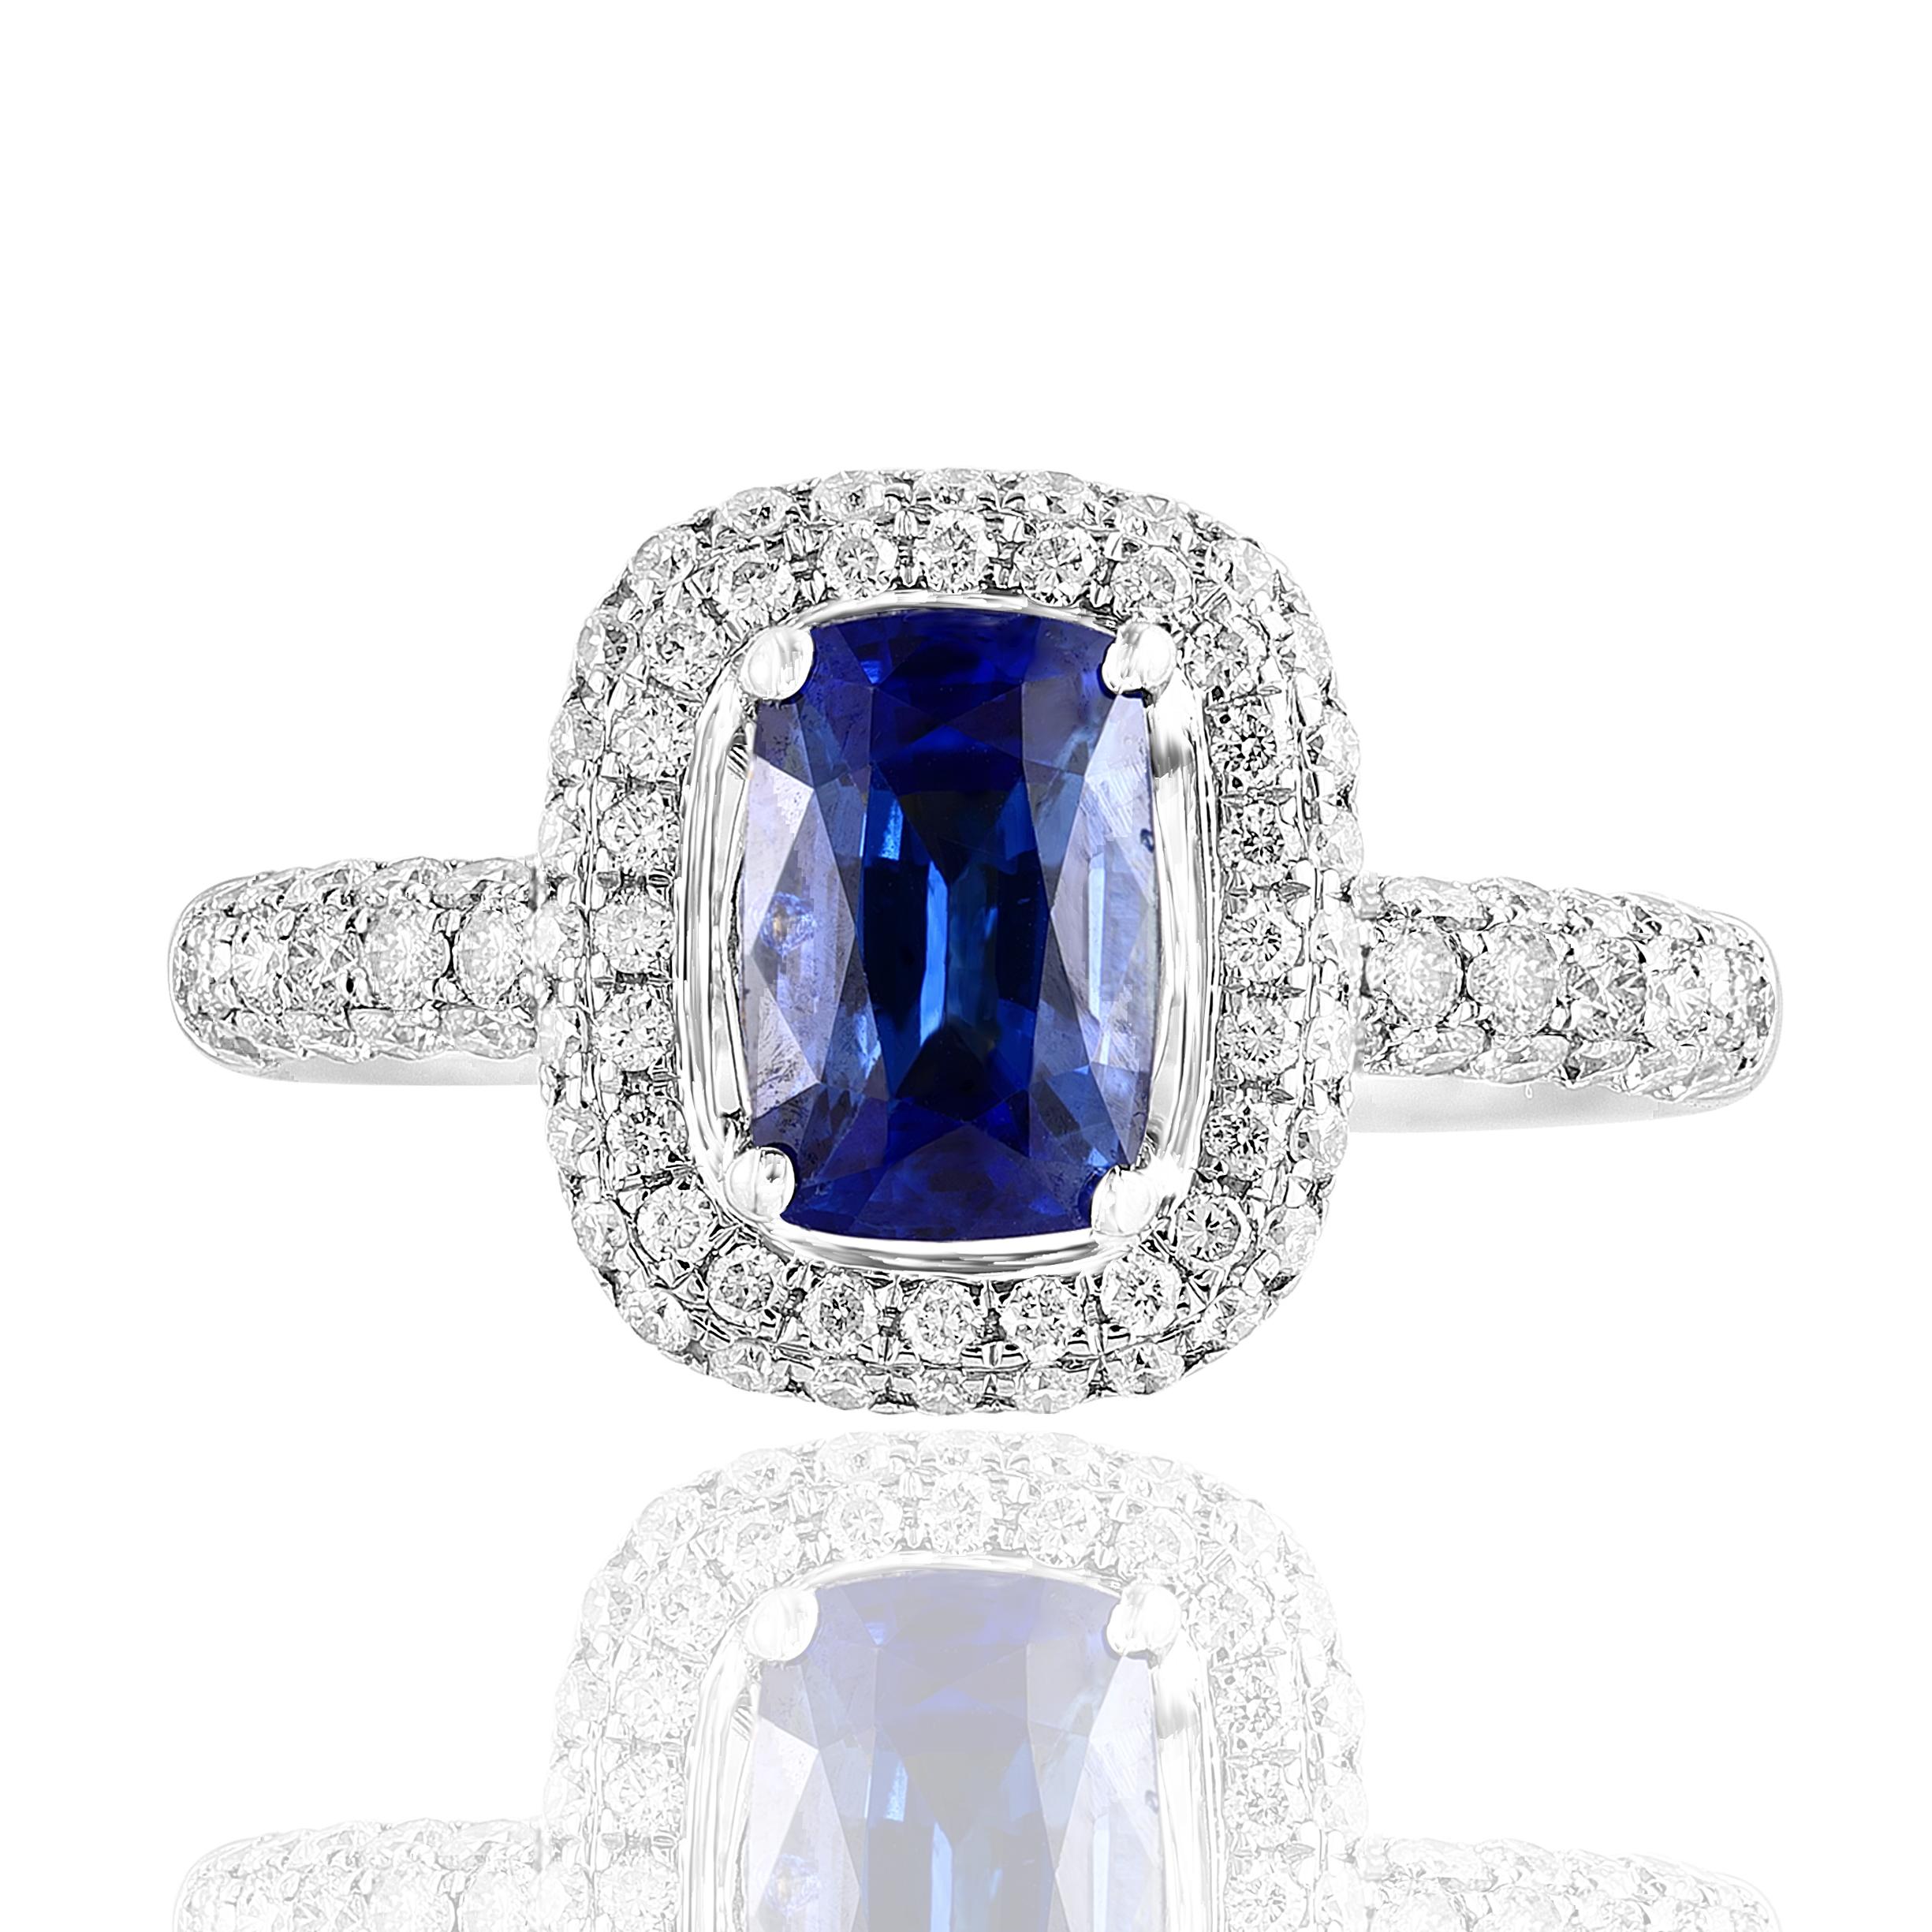 1.50 Carat Cushion Shape vibrant Blue Sapphire and Diamond Cocktail Ring in 18K White Gold. The Center stone is surrounded by 2 rows of 104 Brilliant cut Round Diamonds with a Total weight of 0.75 carats of total weight. 
A classic Cocktail Ring